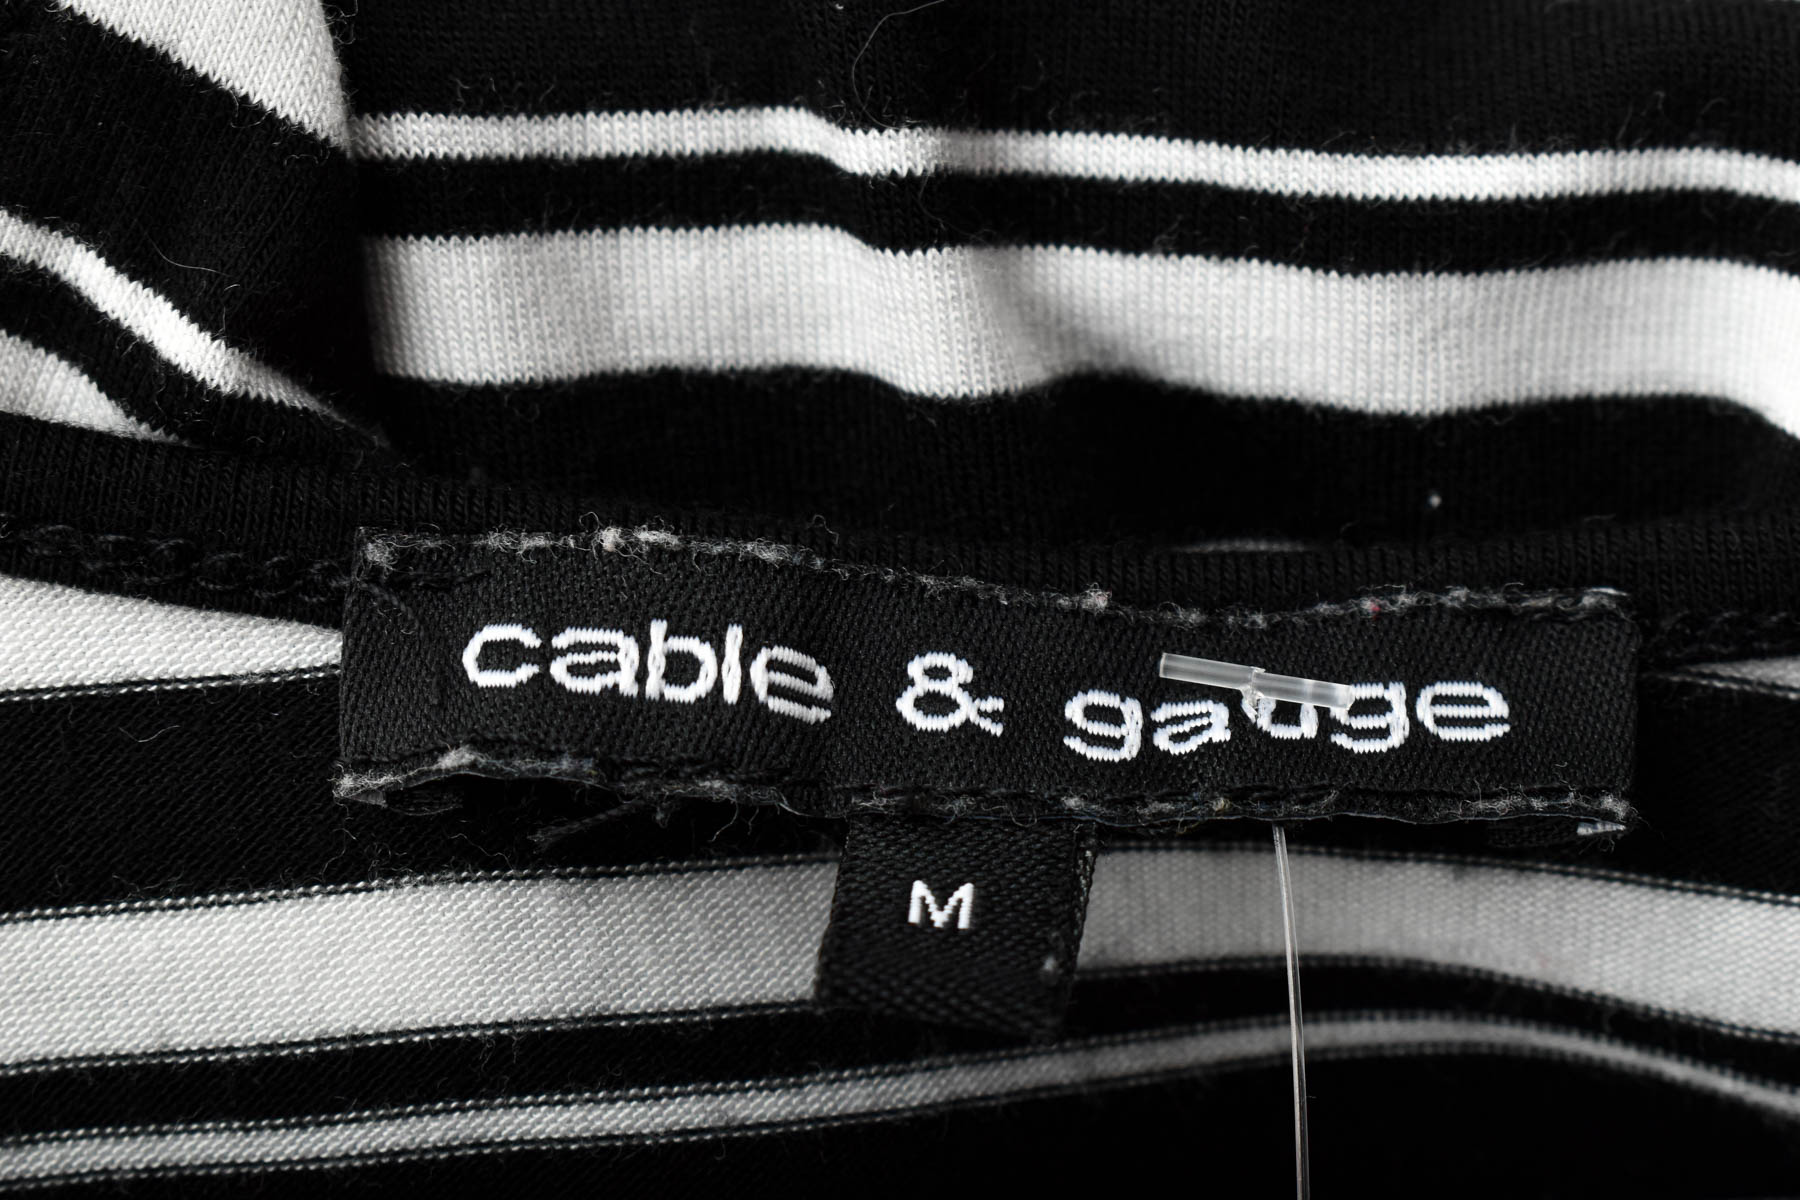 Дамска блуза - Cable & Gauge - 2